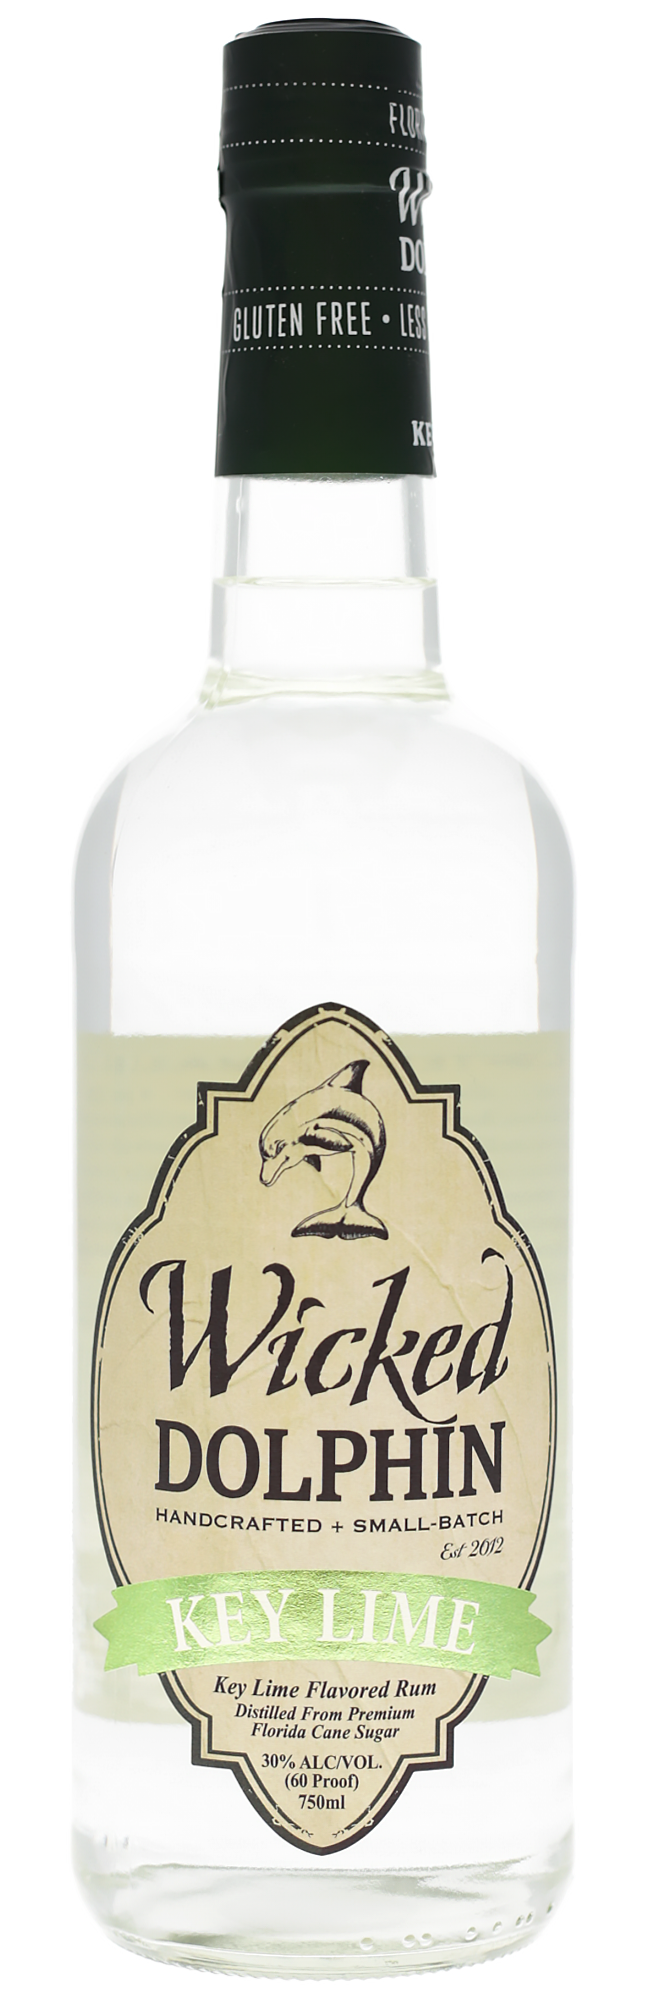 Wicked Dolphin Key Lime Rum